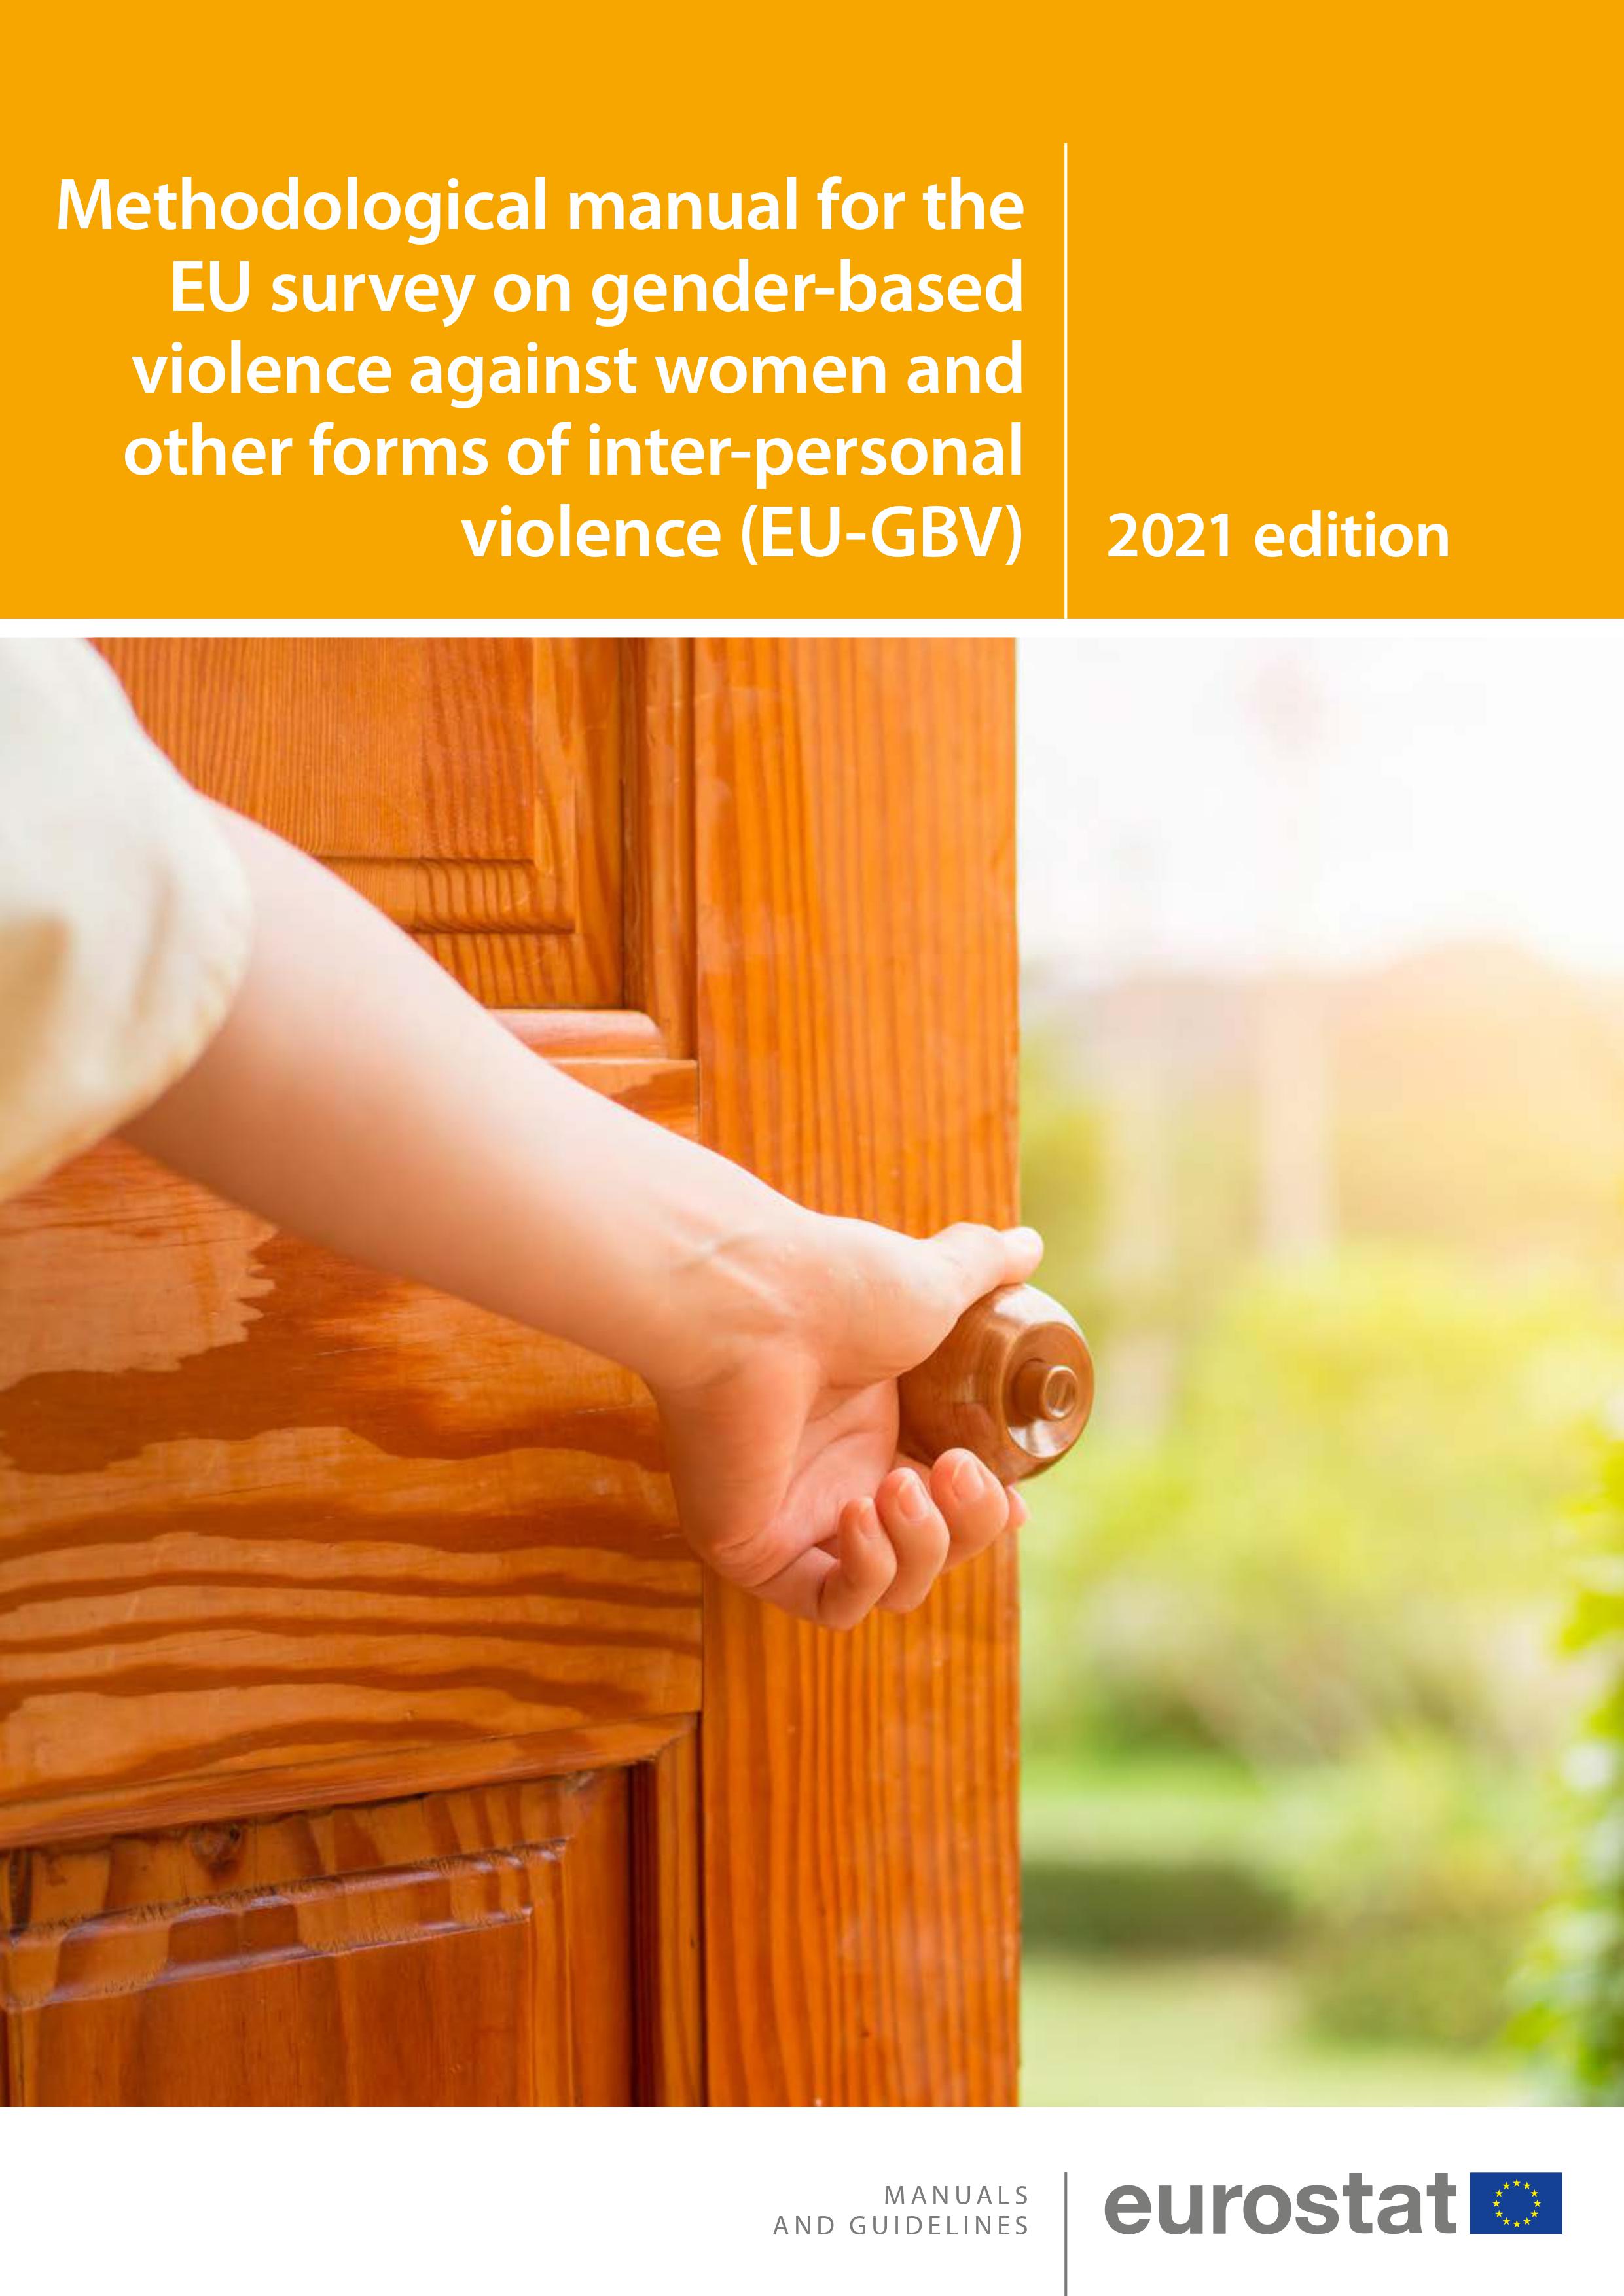 Front cover of the methodological manual for the EU survey on gender-based violence against women and other forms of inter-personal violence (EU-GBV) - 2021 edition